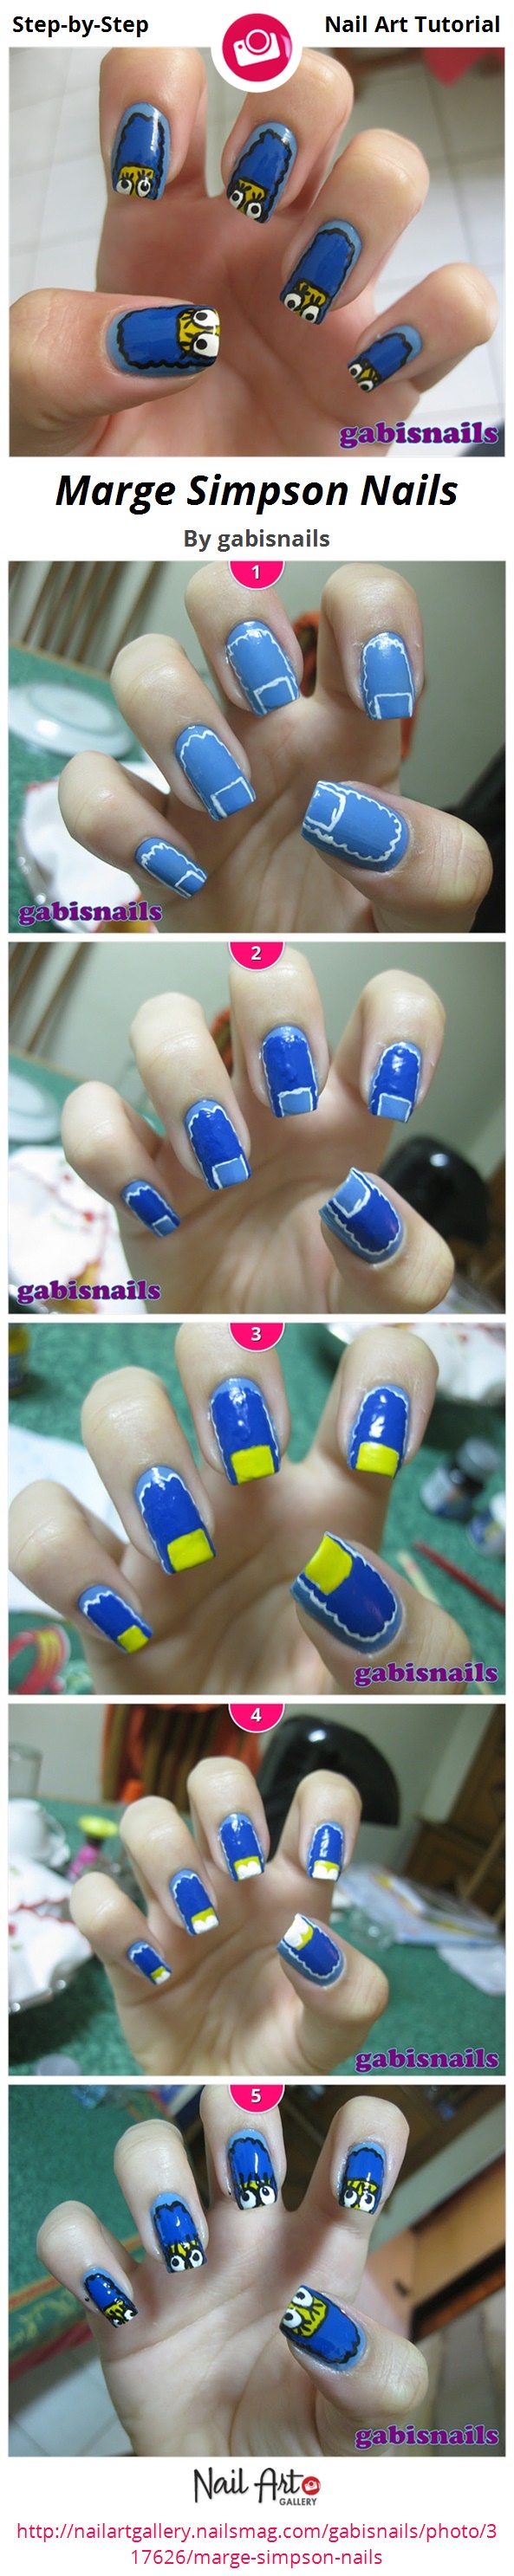 Marge Simpson Nails - Nail Art Gallery